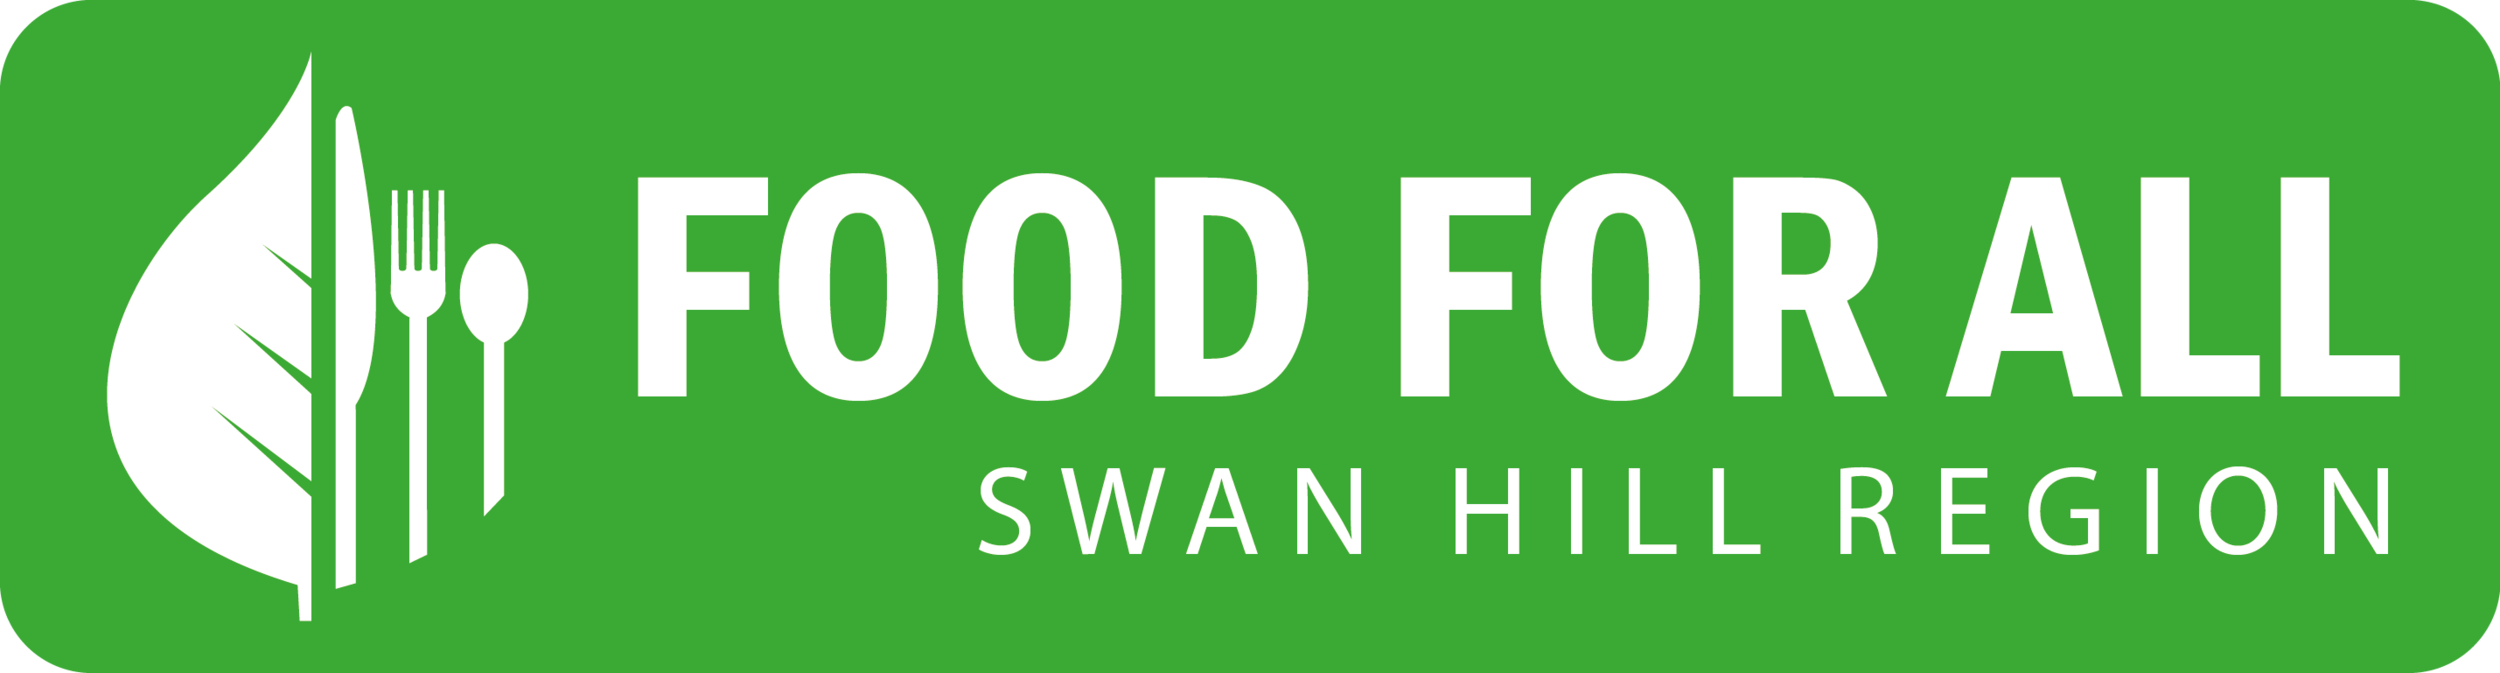 Food For All - Swan Hill Region - Building a vibrant and connected food system